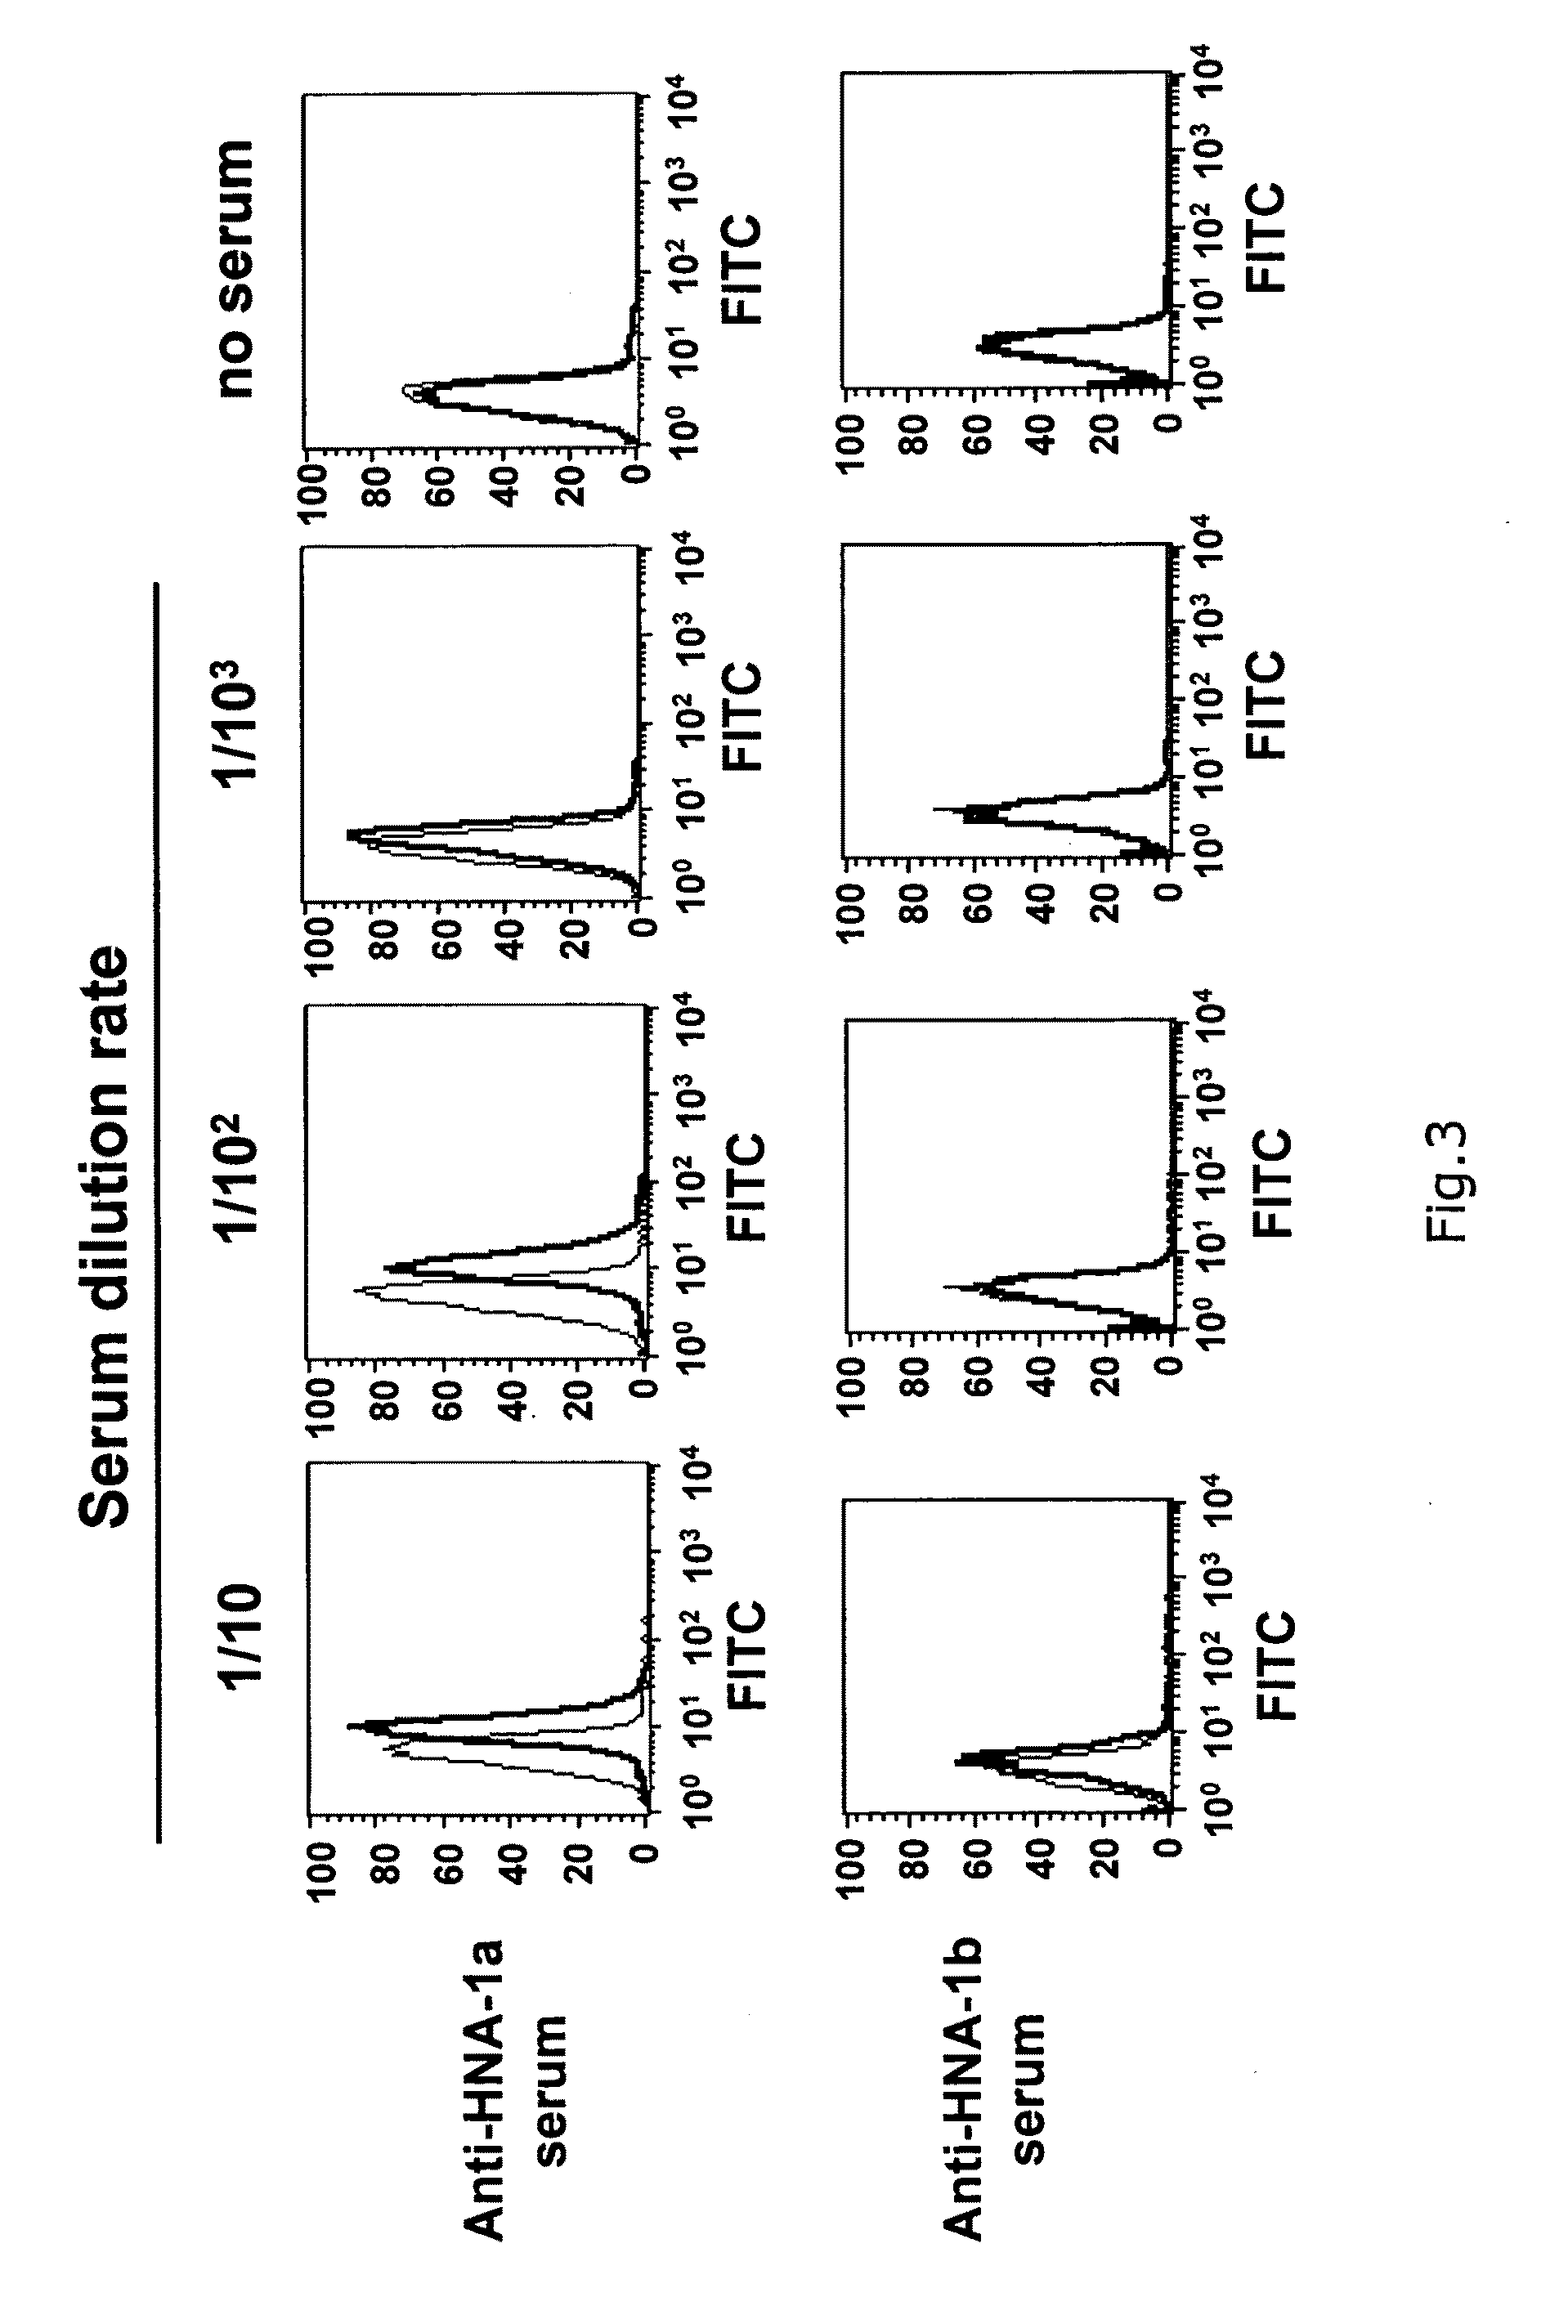 Panel Cell Used for Granulocyte Antibody Detection